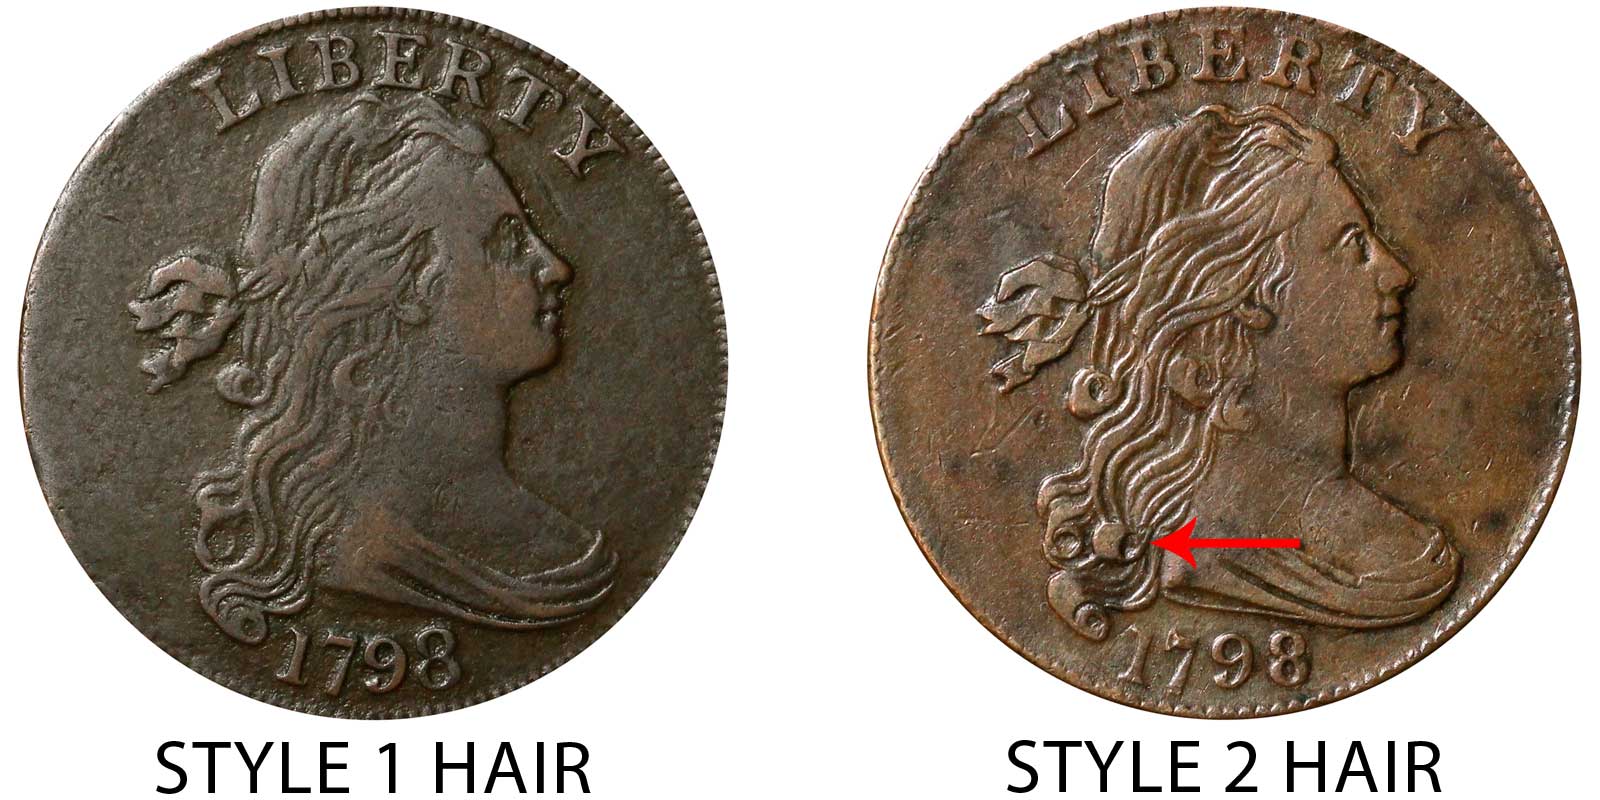 https://www.usacoinbook.com/us-coins/1798-style-1-hair-vs-style-2-hair-draped-bust-large-cent.jpg